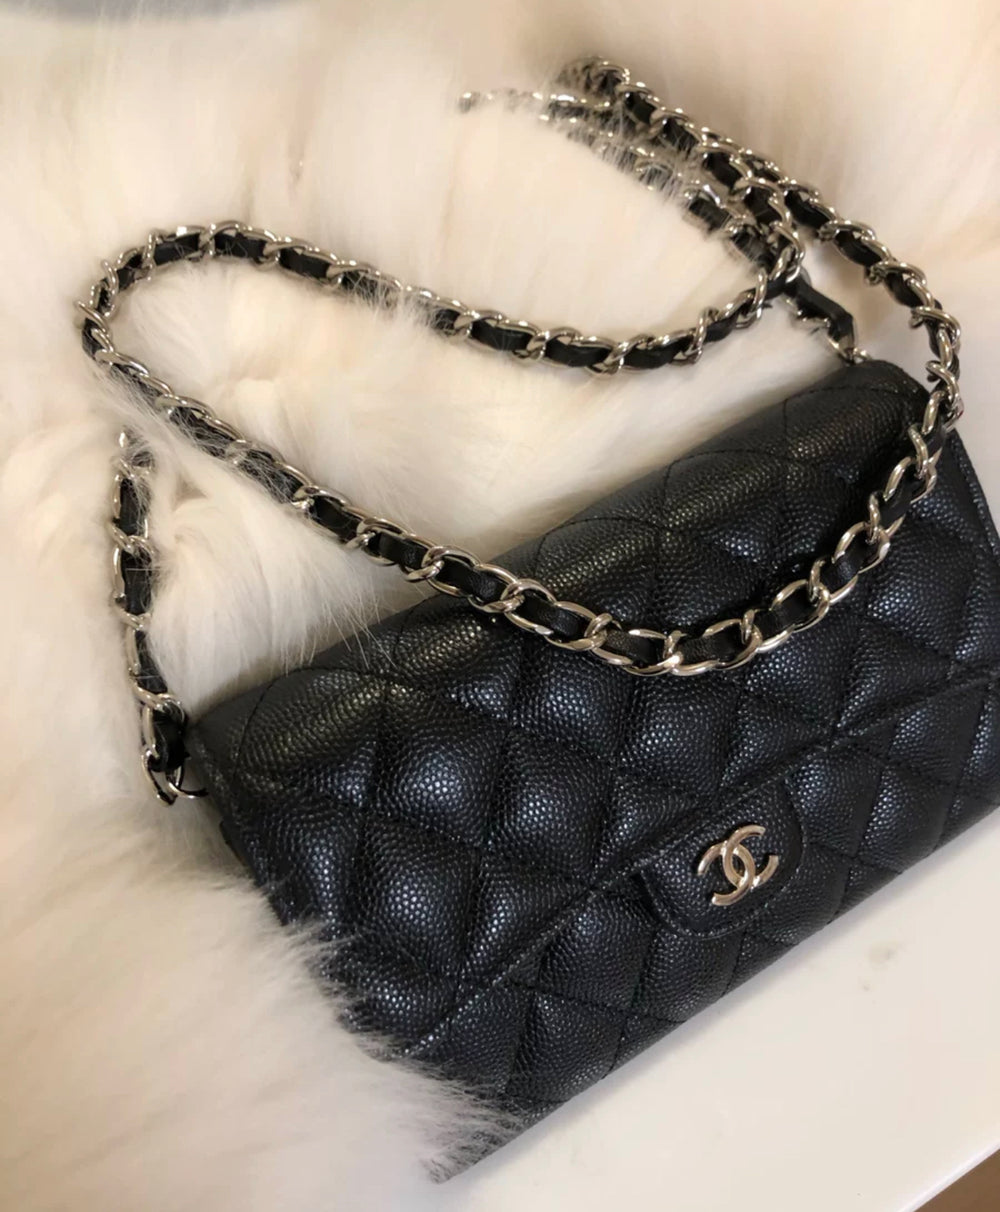 Madison C. review of Converter Kit for Chanel Long Wallet